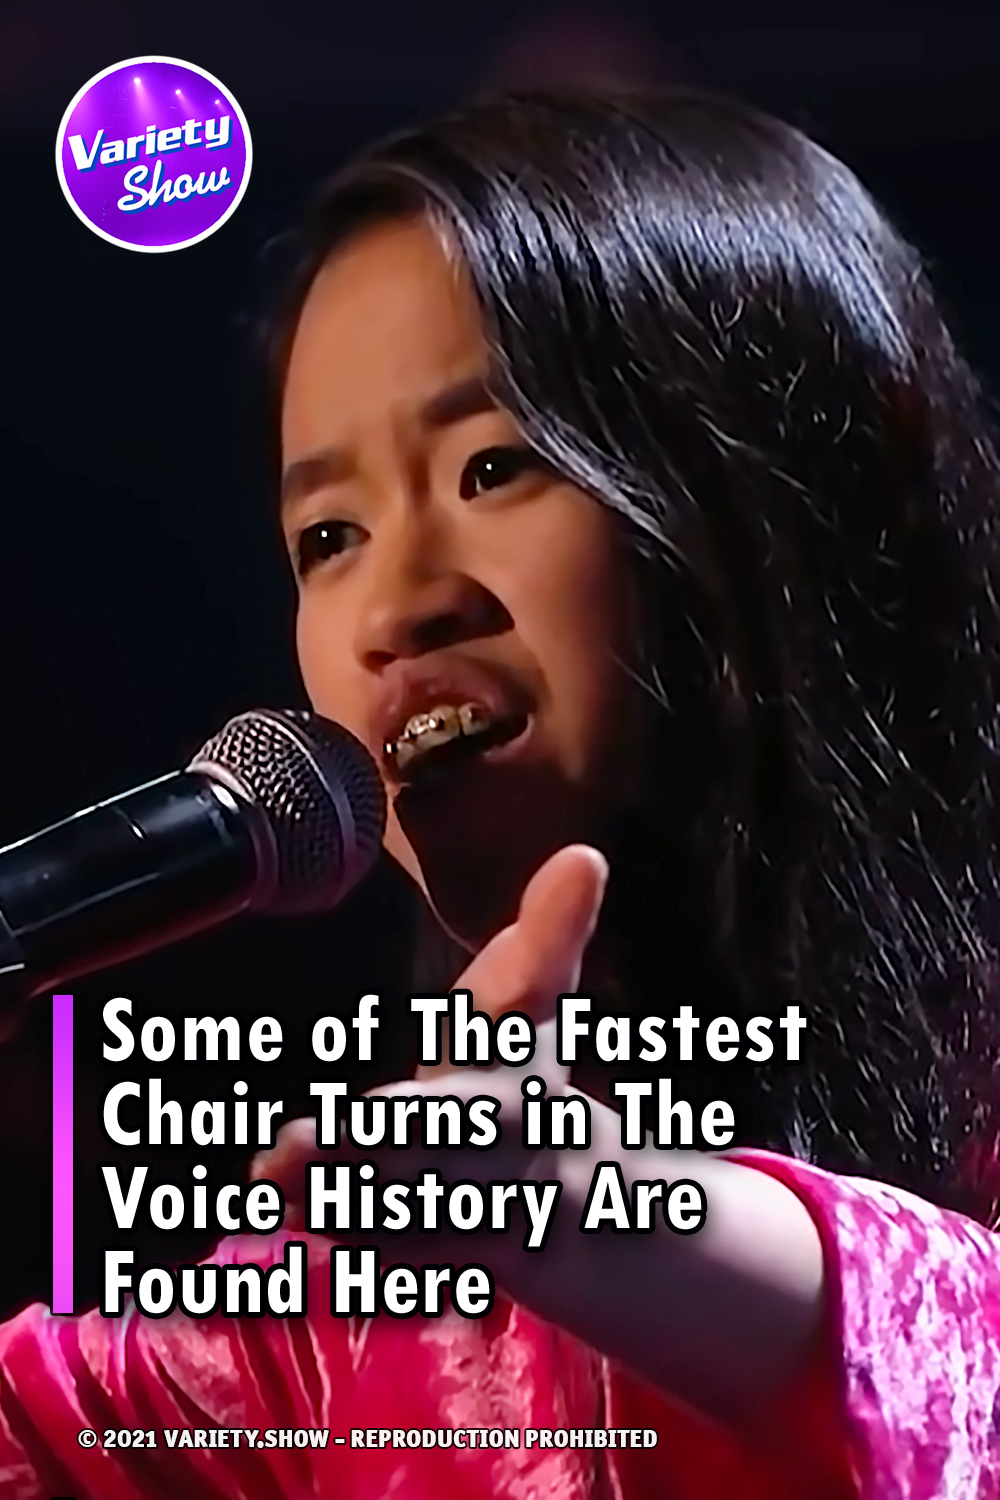 Some of The Fastest Chair Turns in The Voice History Are Found Here